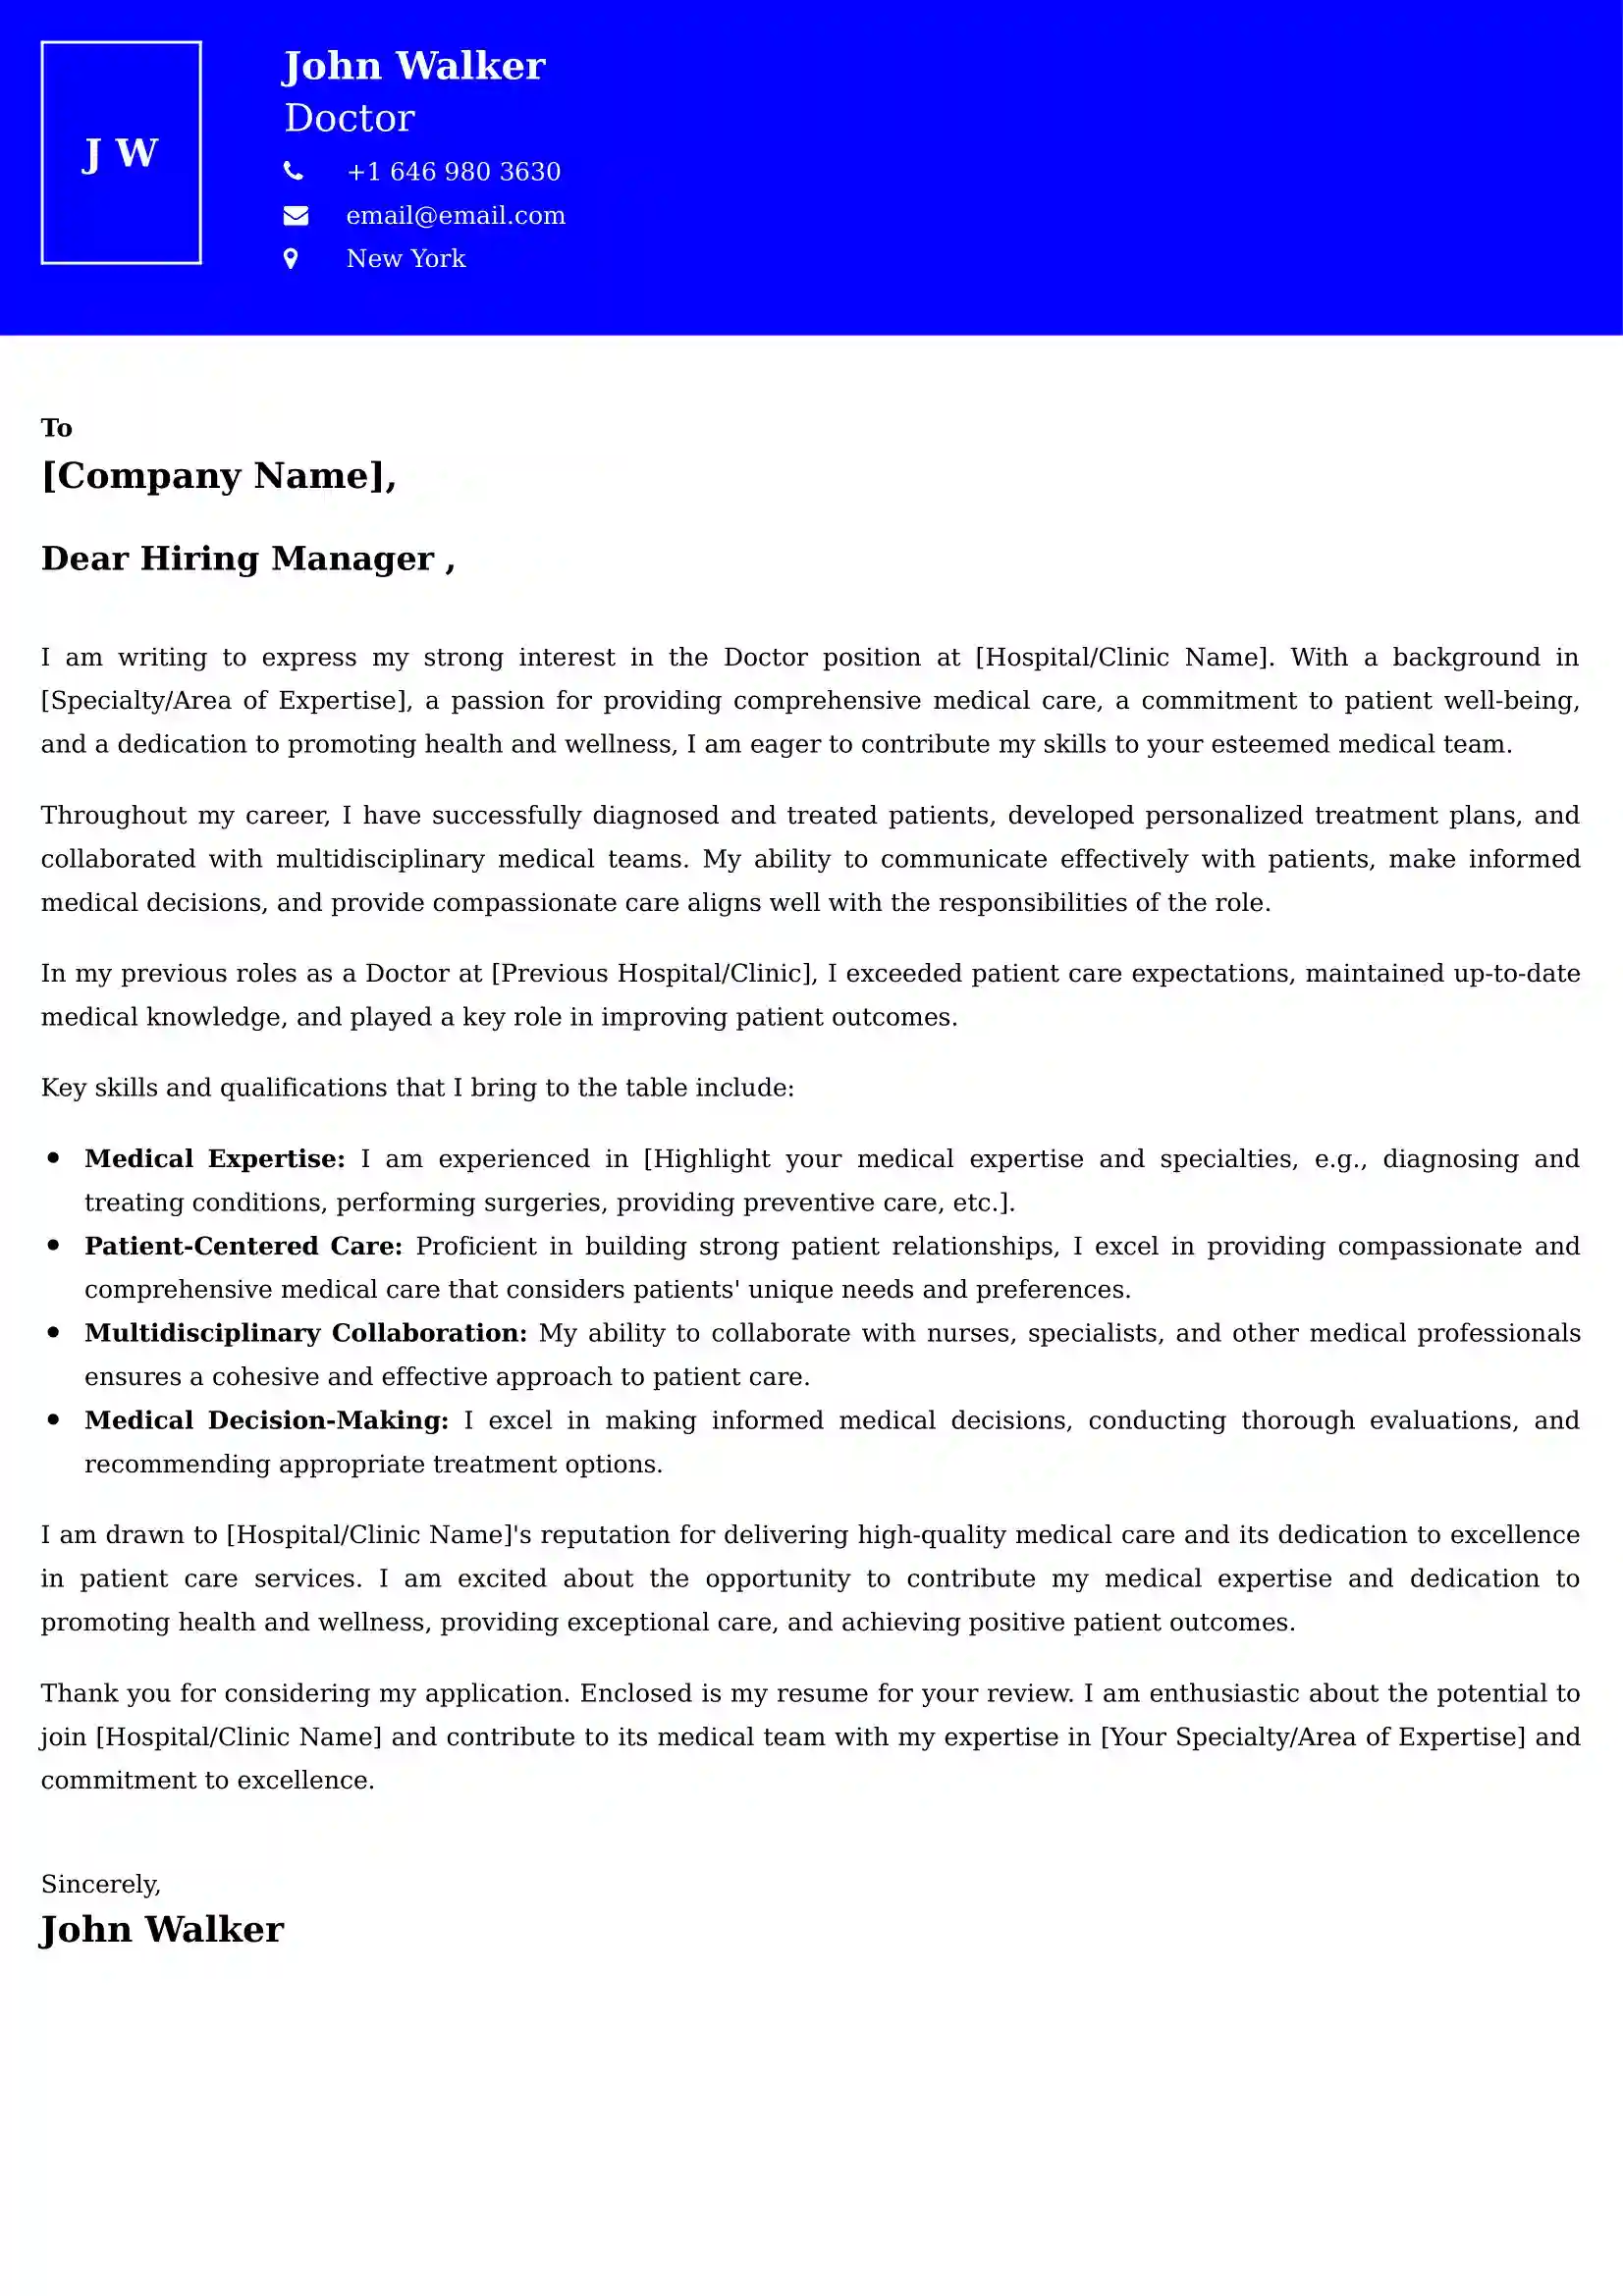 Doctor Cover Letter Examples - Latest UK Format